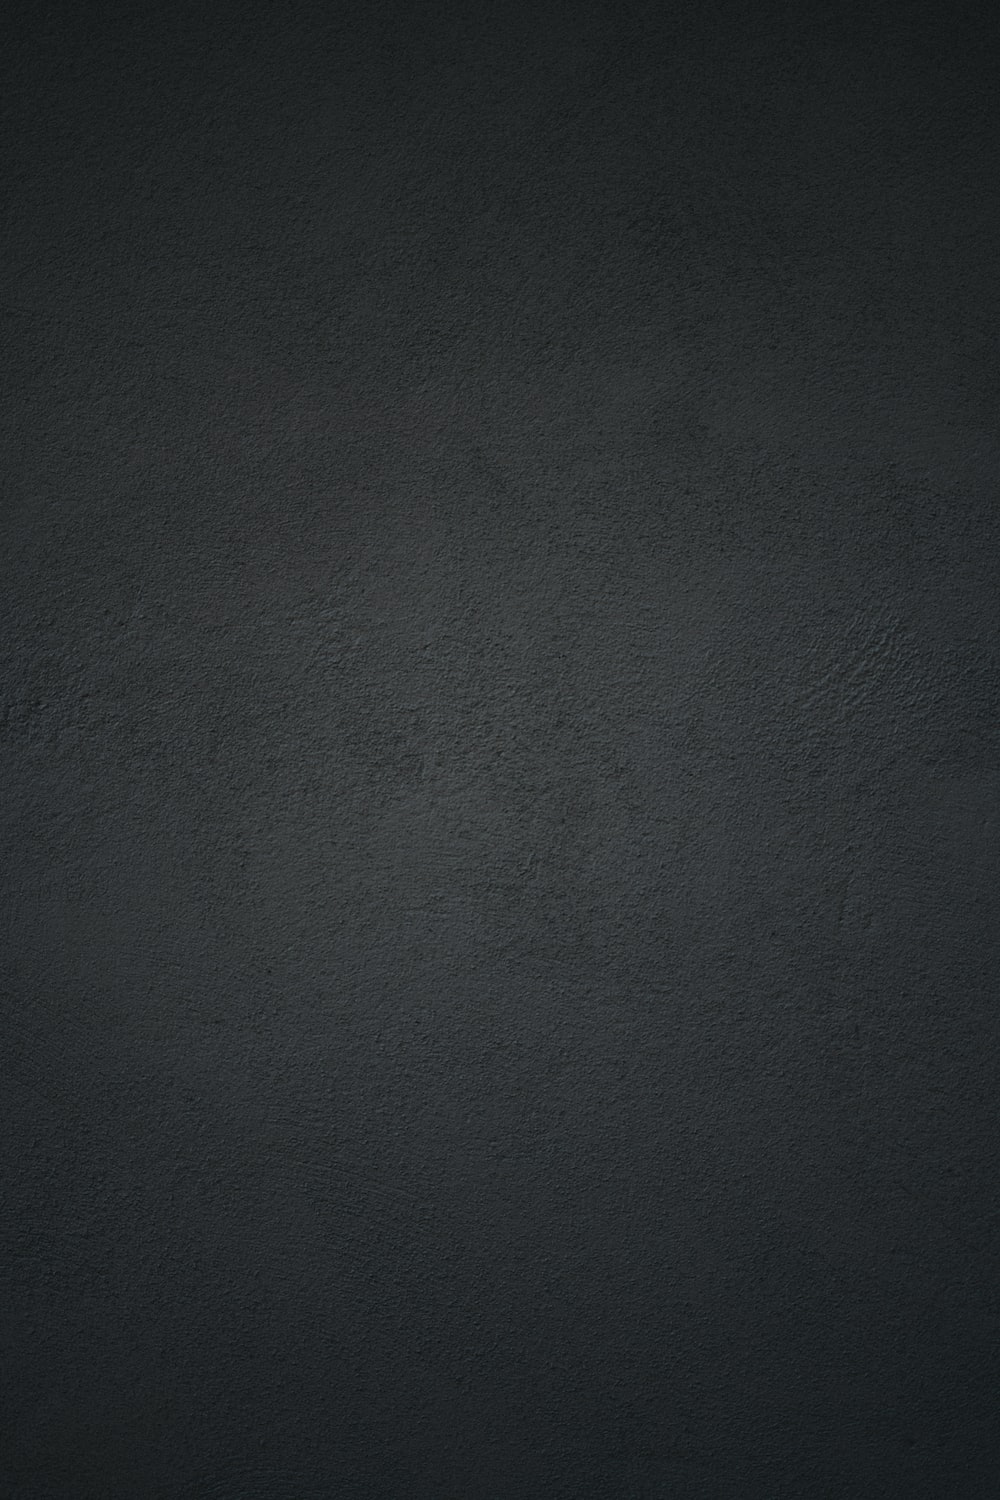 Black Paper Texture Picture. Download Free Image